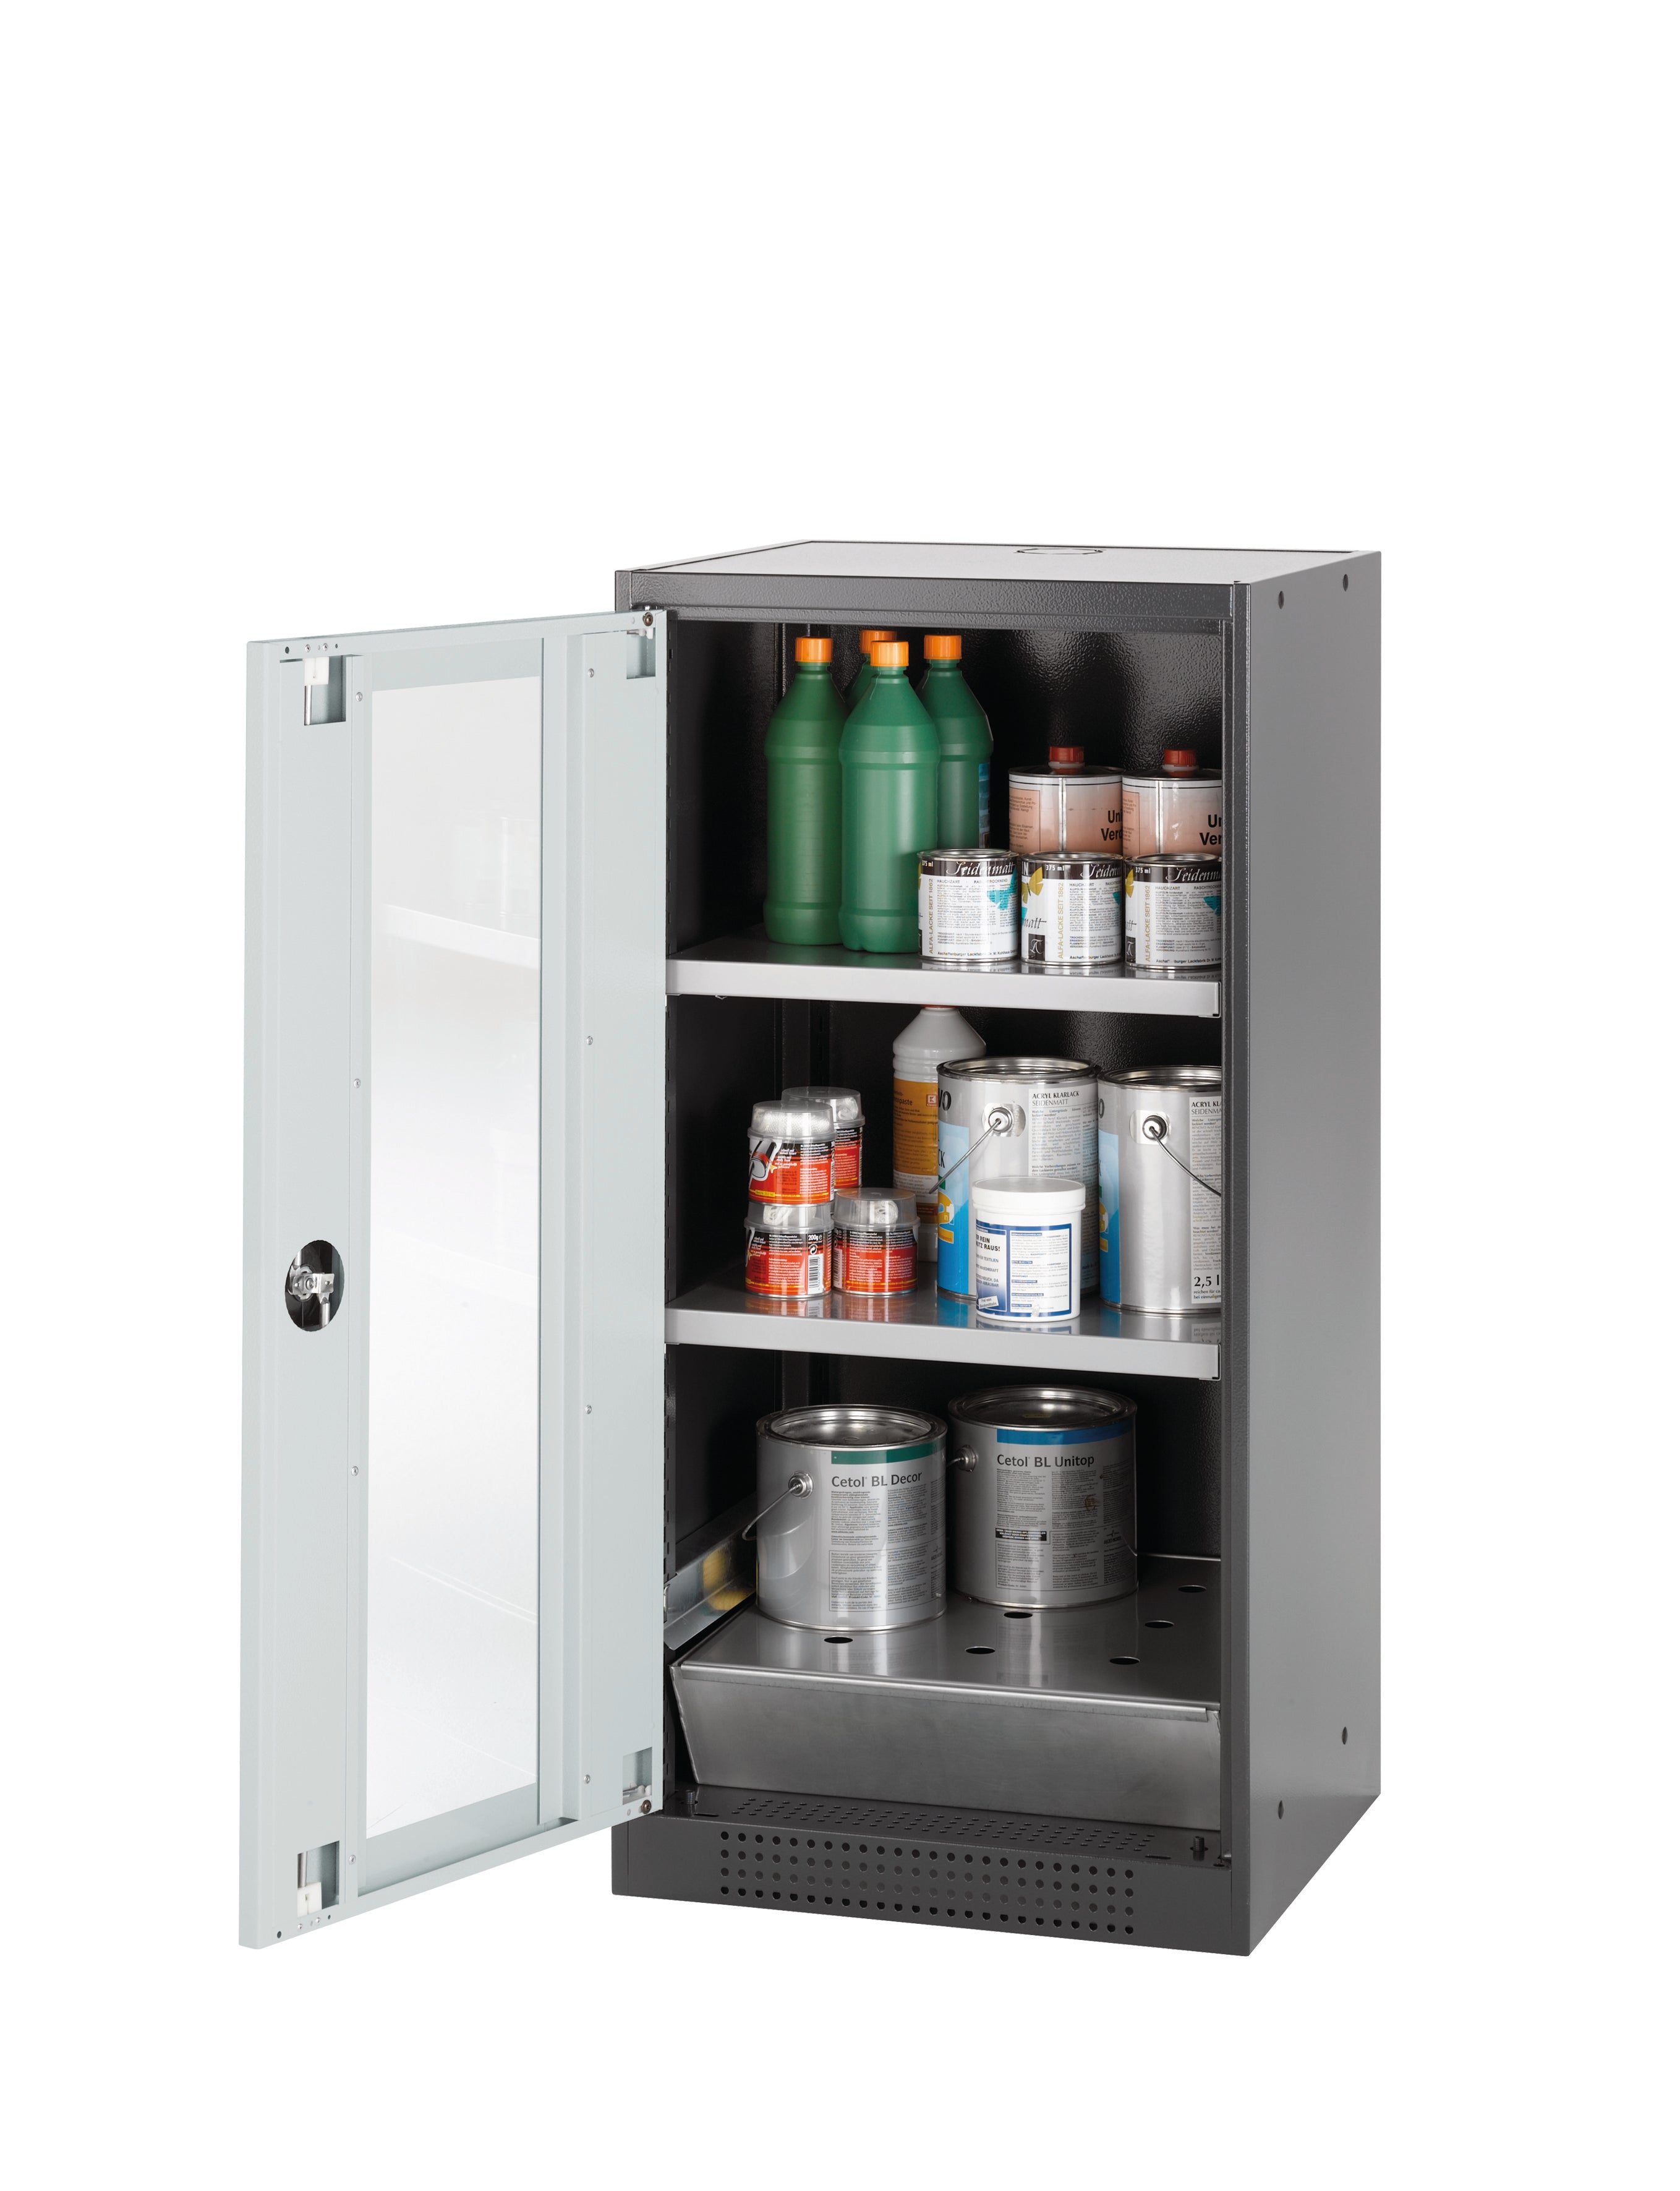 Chemical cabinet CS-CLASSIC model CS.110.054 in light gray RAL 7035 with 2x standard shelves (sheet steel)